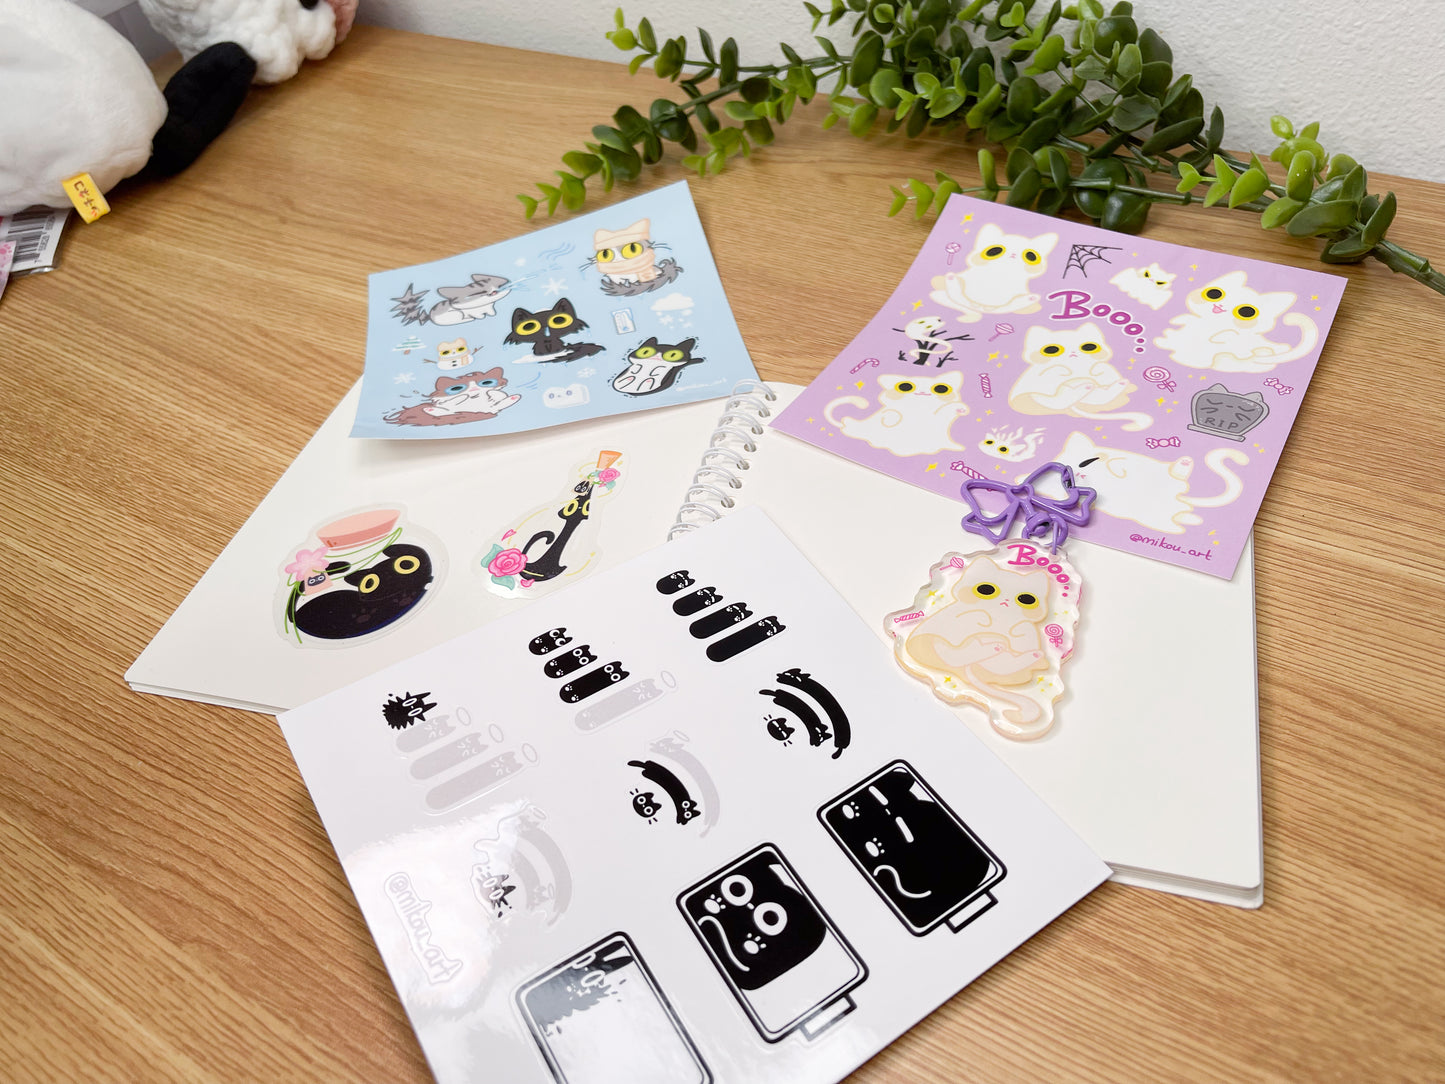 Sticker Sheet | Spooky Ghost Cat Collage | 5.5x5.5 inch | Waterproof & Fade-Resistant | Gift for Cat Lovers | Mikou Original Art